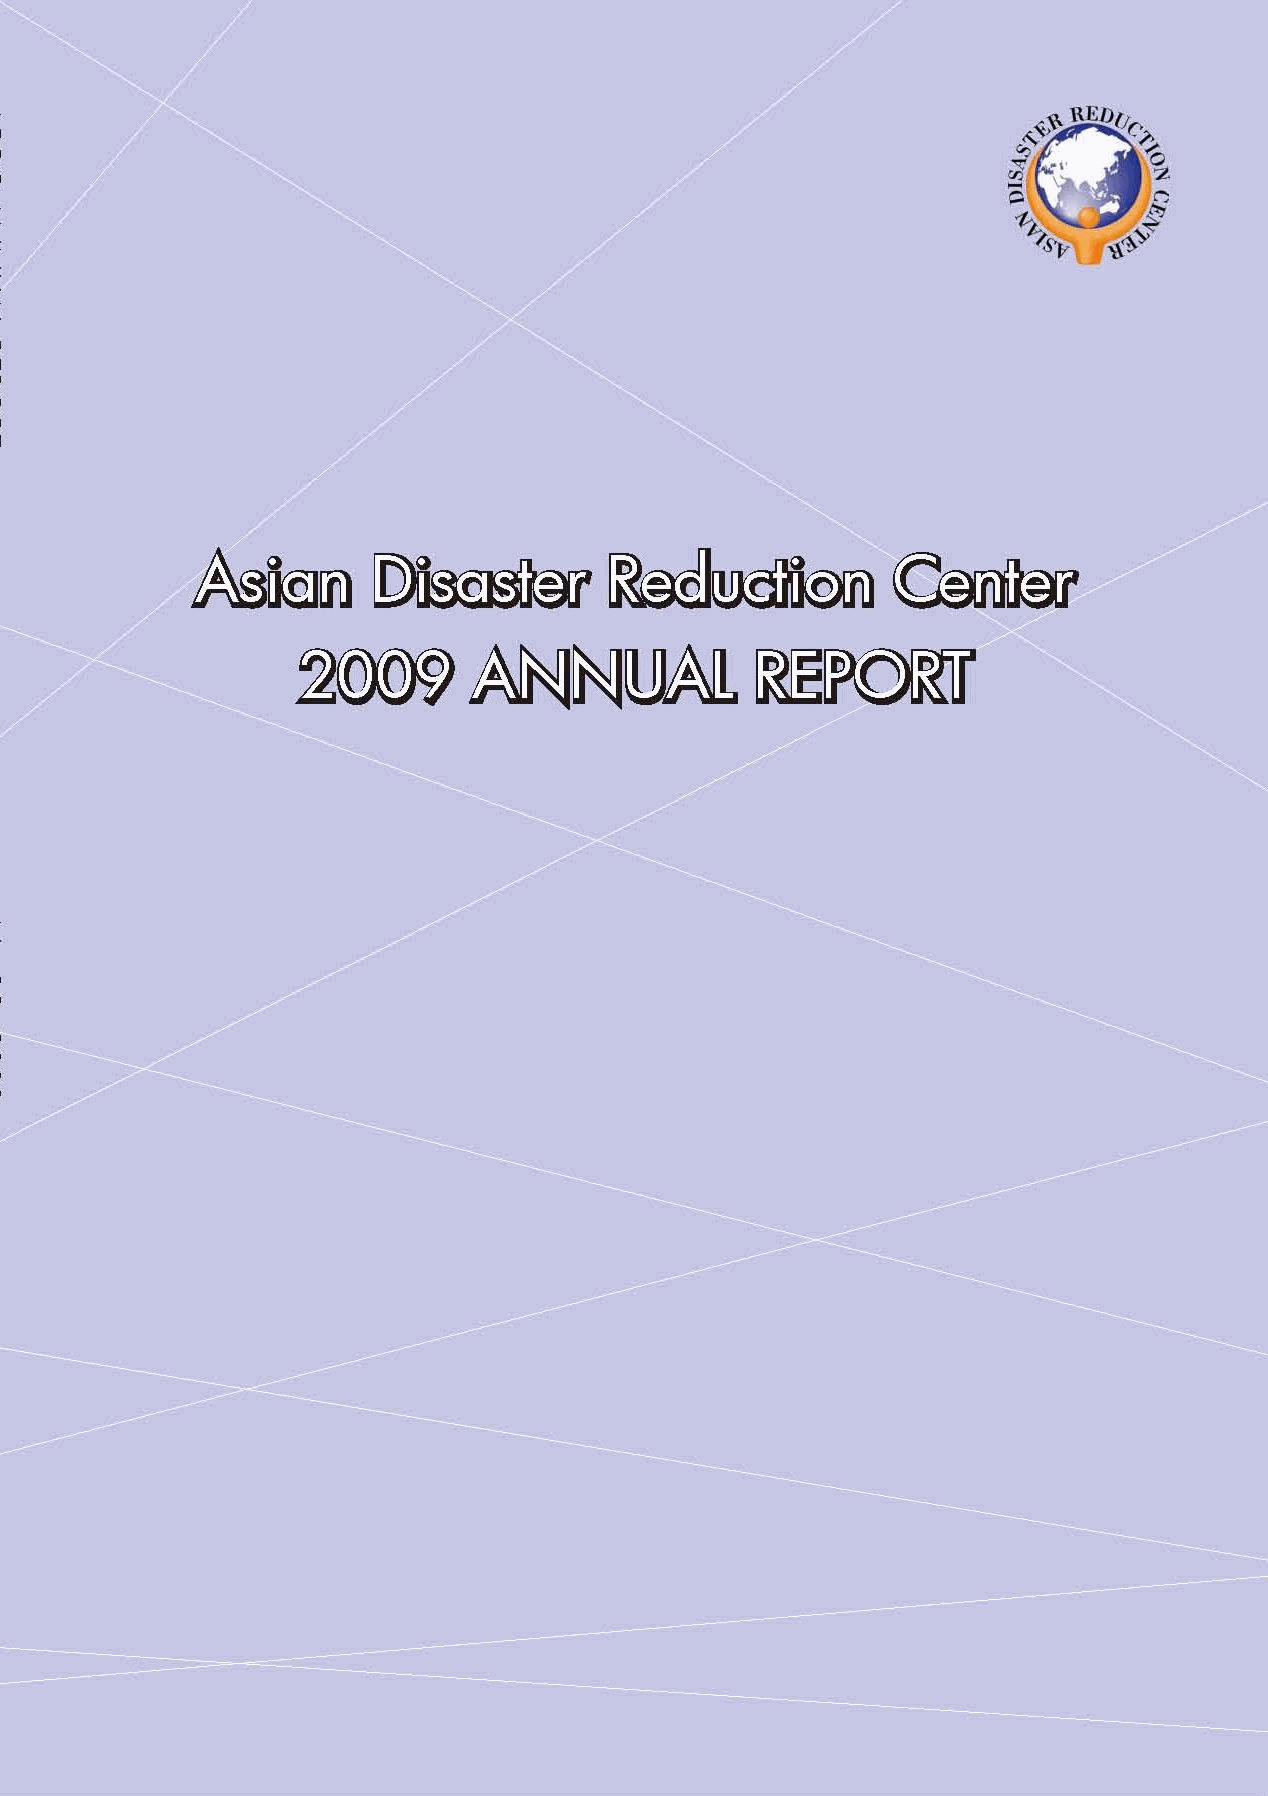 FY2009 Annual Report